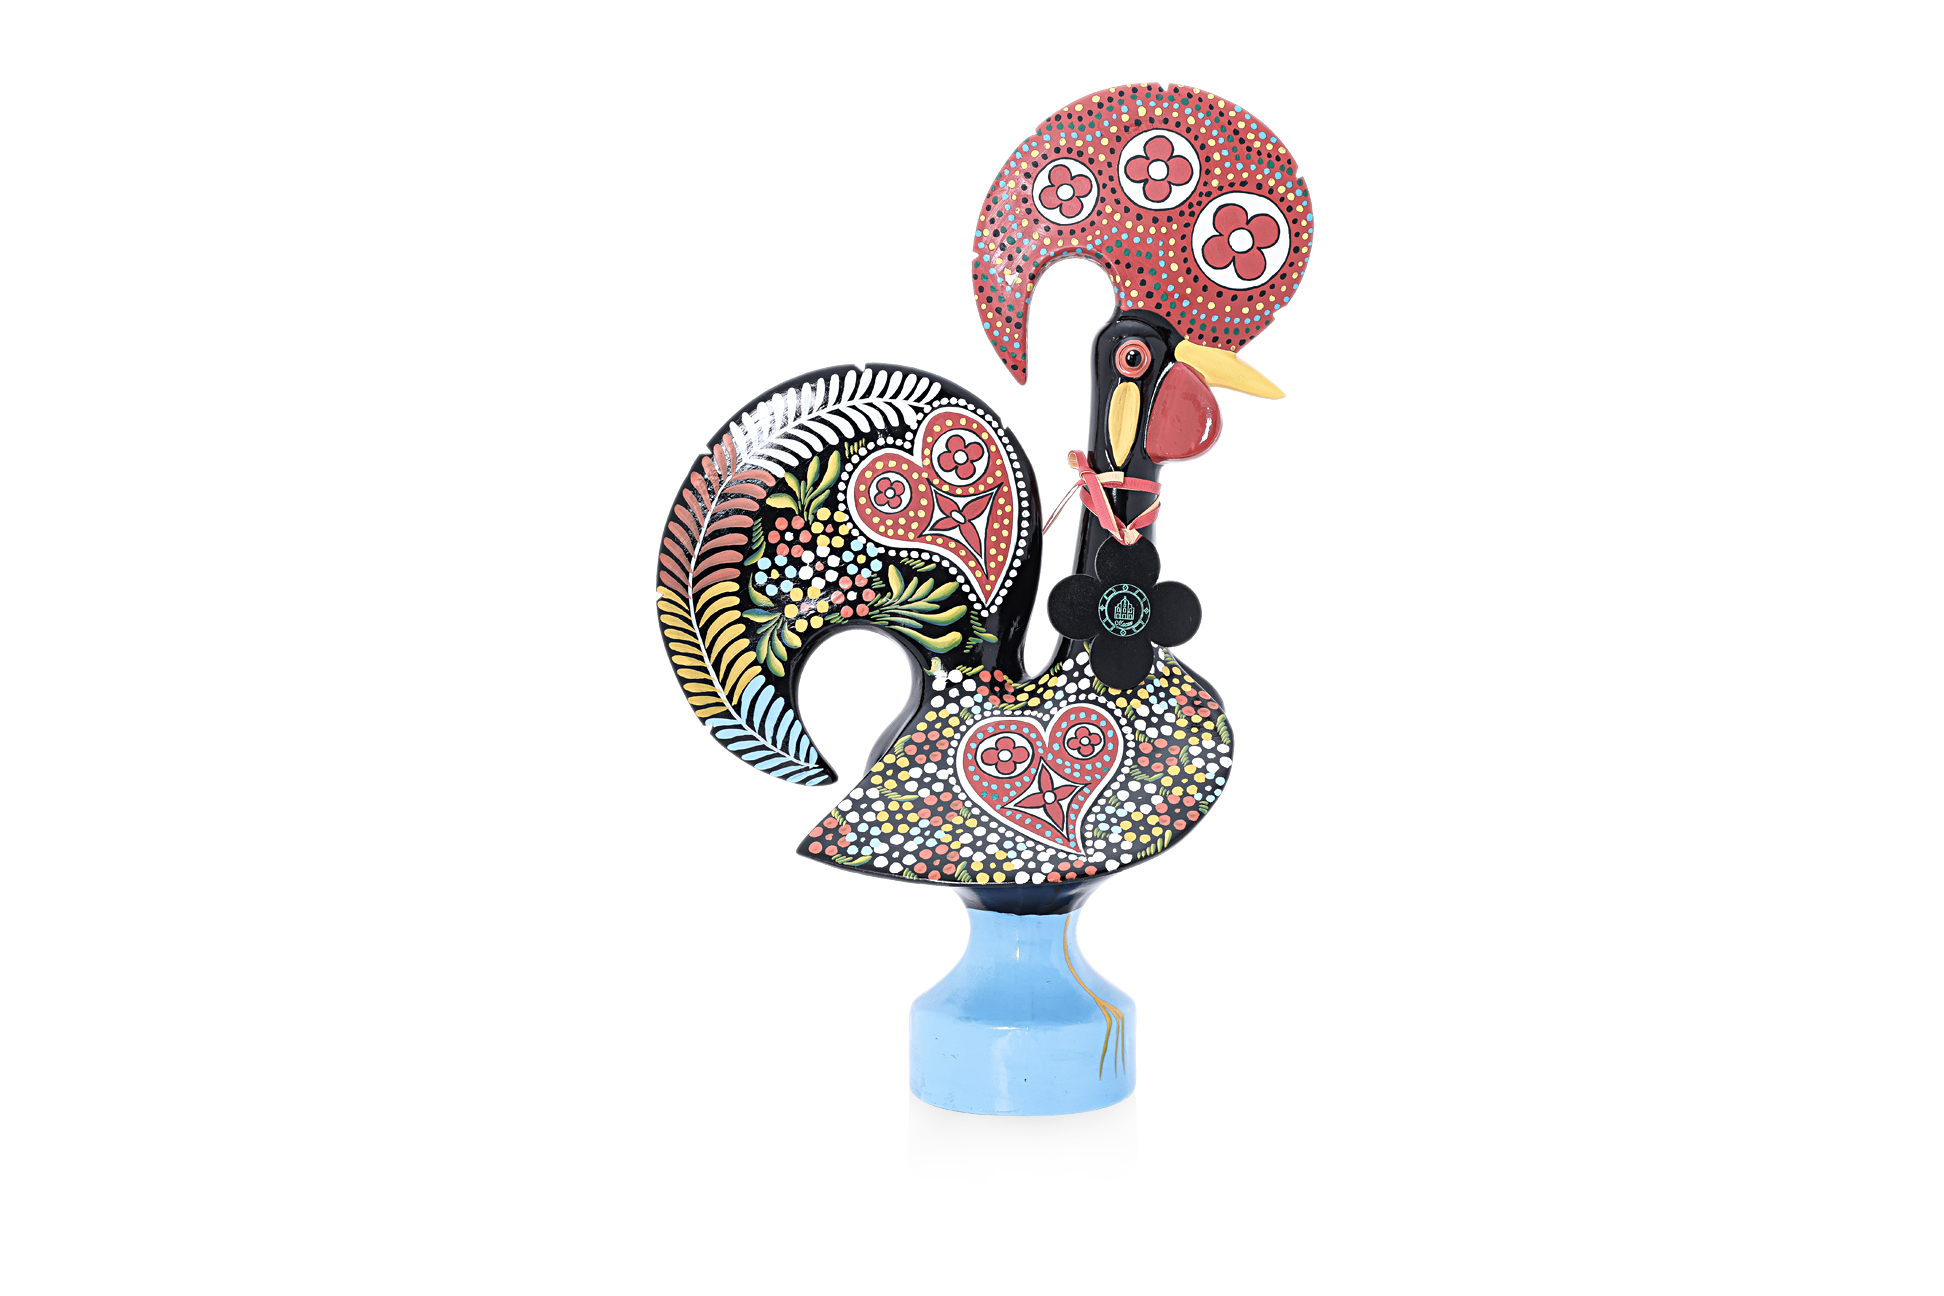 A CERAMIC ROOSTER OF BARCELOS SCULPTURE